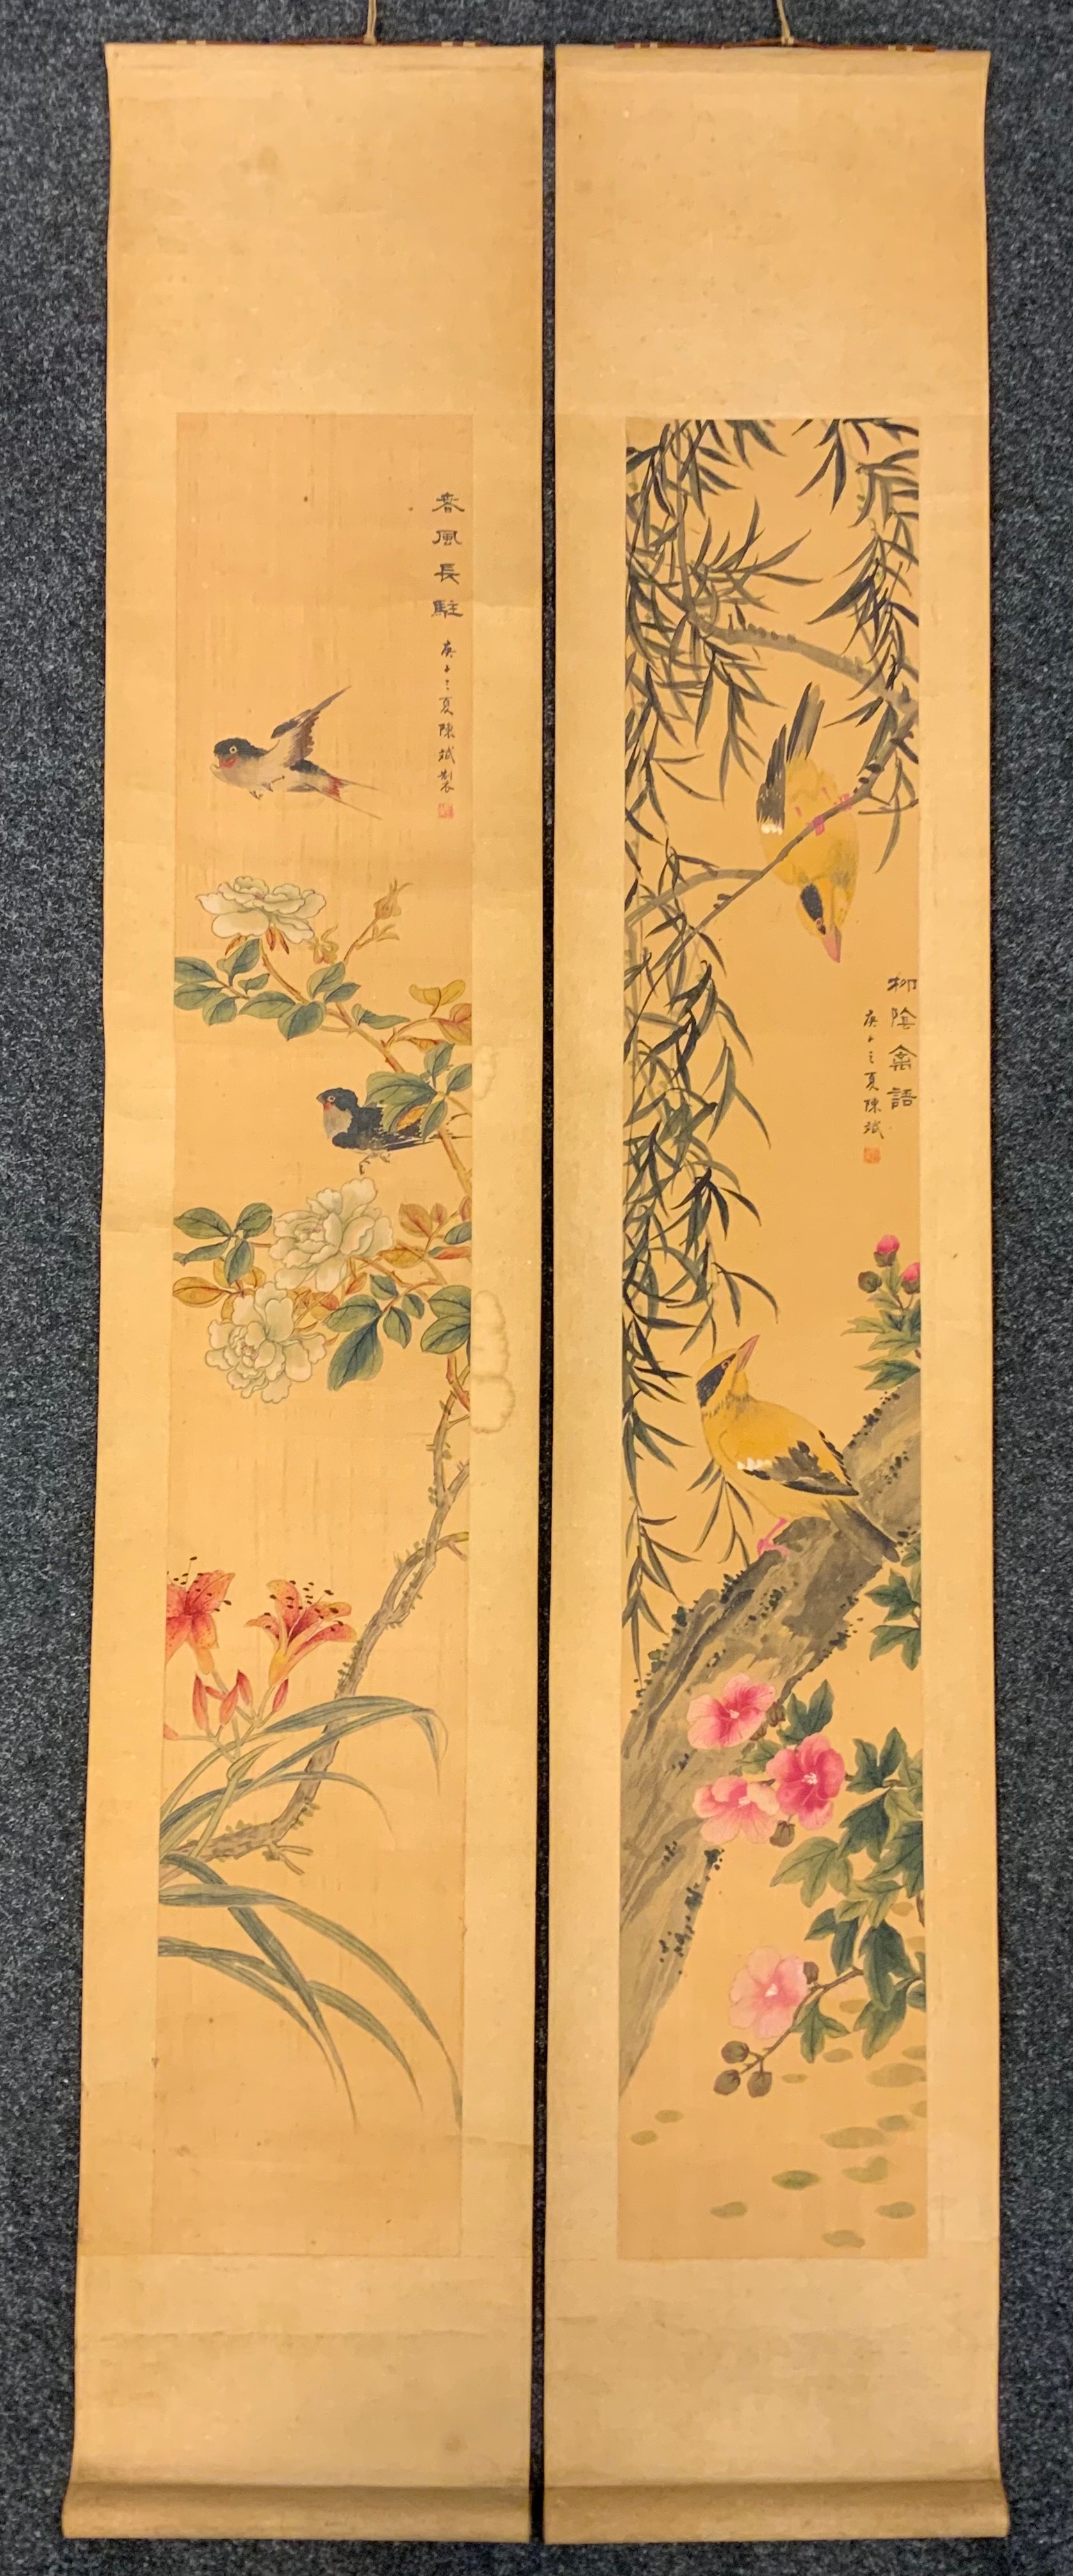 A pair of Japanese wall scrolls, birds amongst blossoms, signed with characters (2)